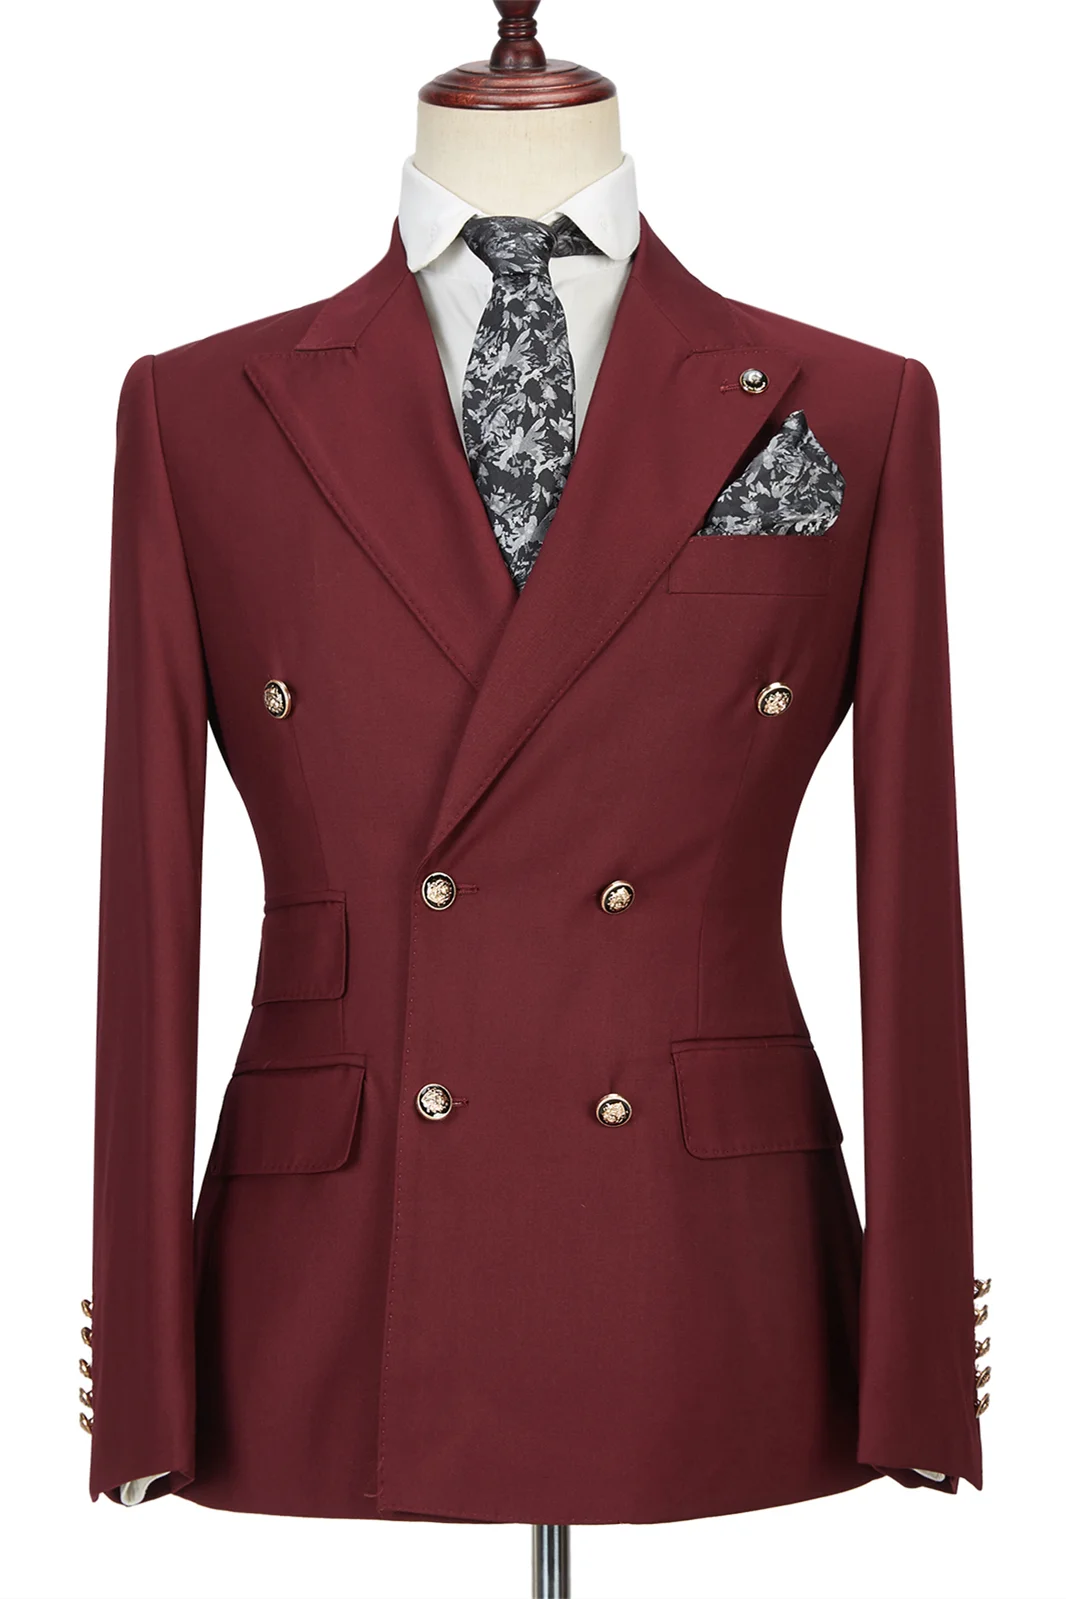 Glamorous Burgundy Groomsmen Outfits Peak Lapel With Double Breasted Gentle